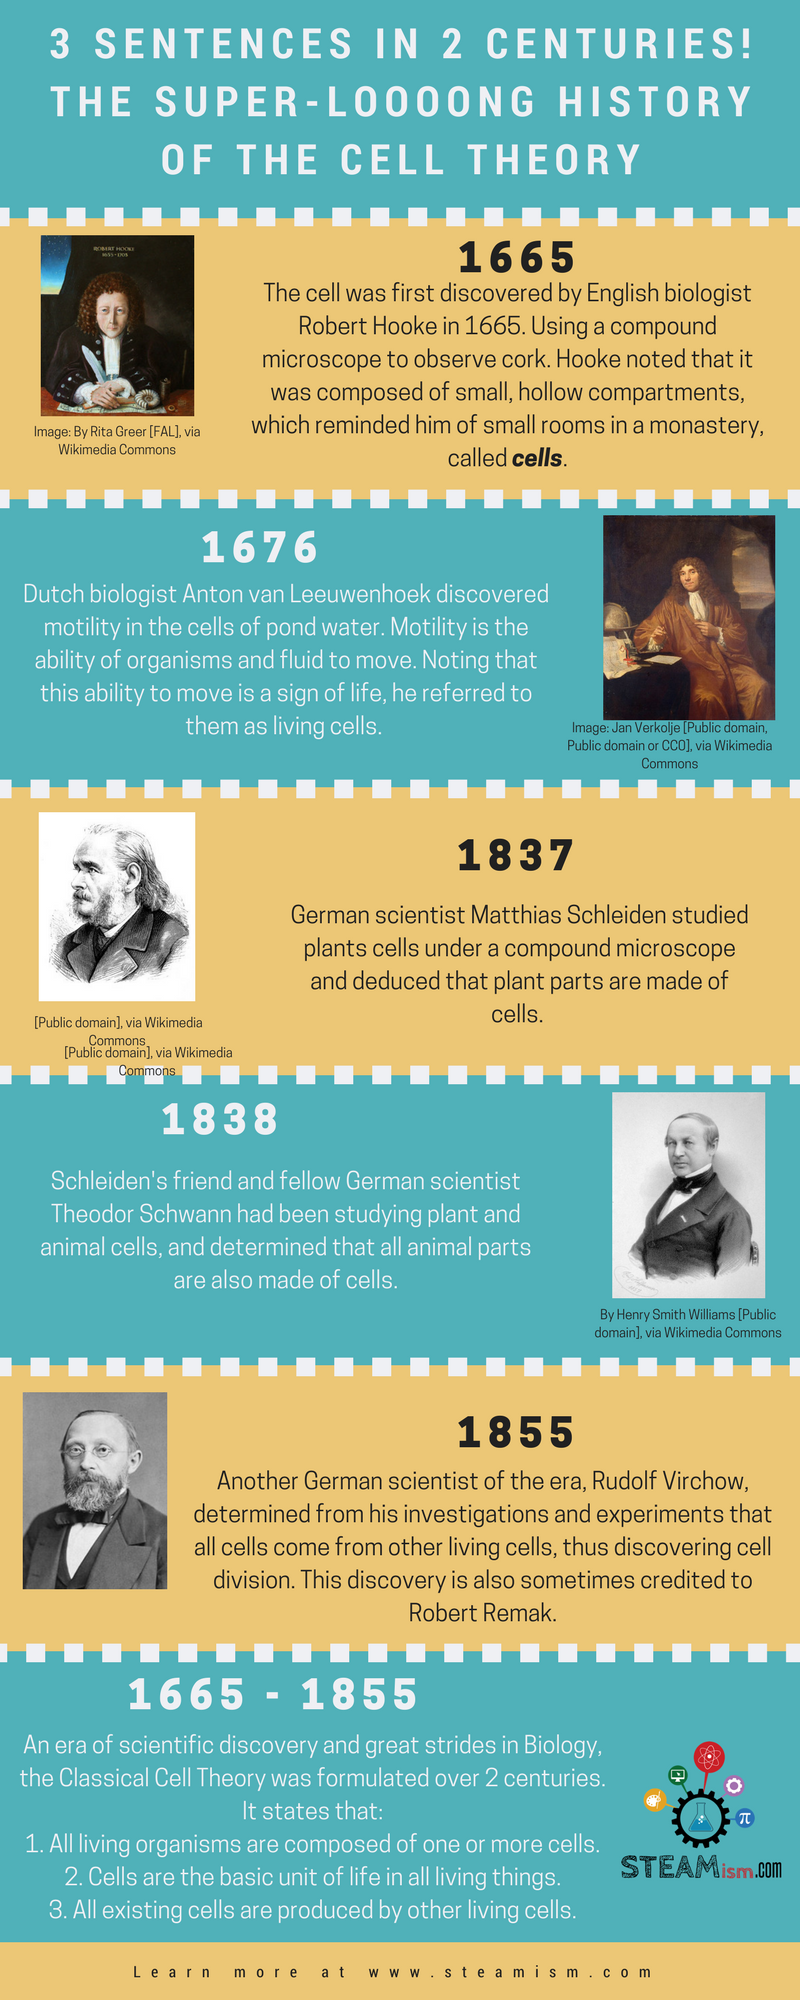 History of cell theory infographic